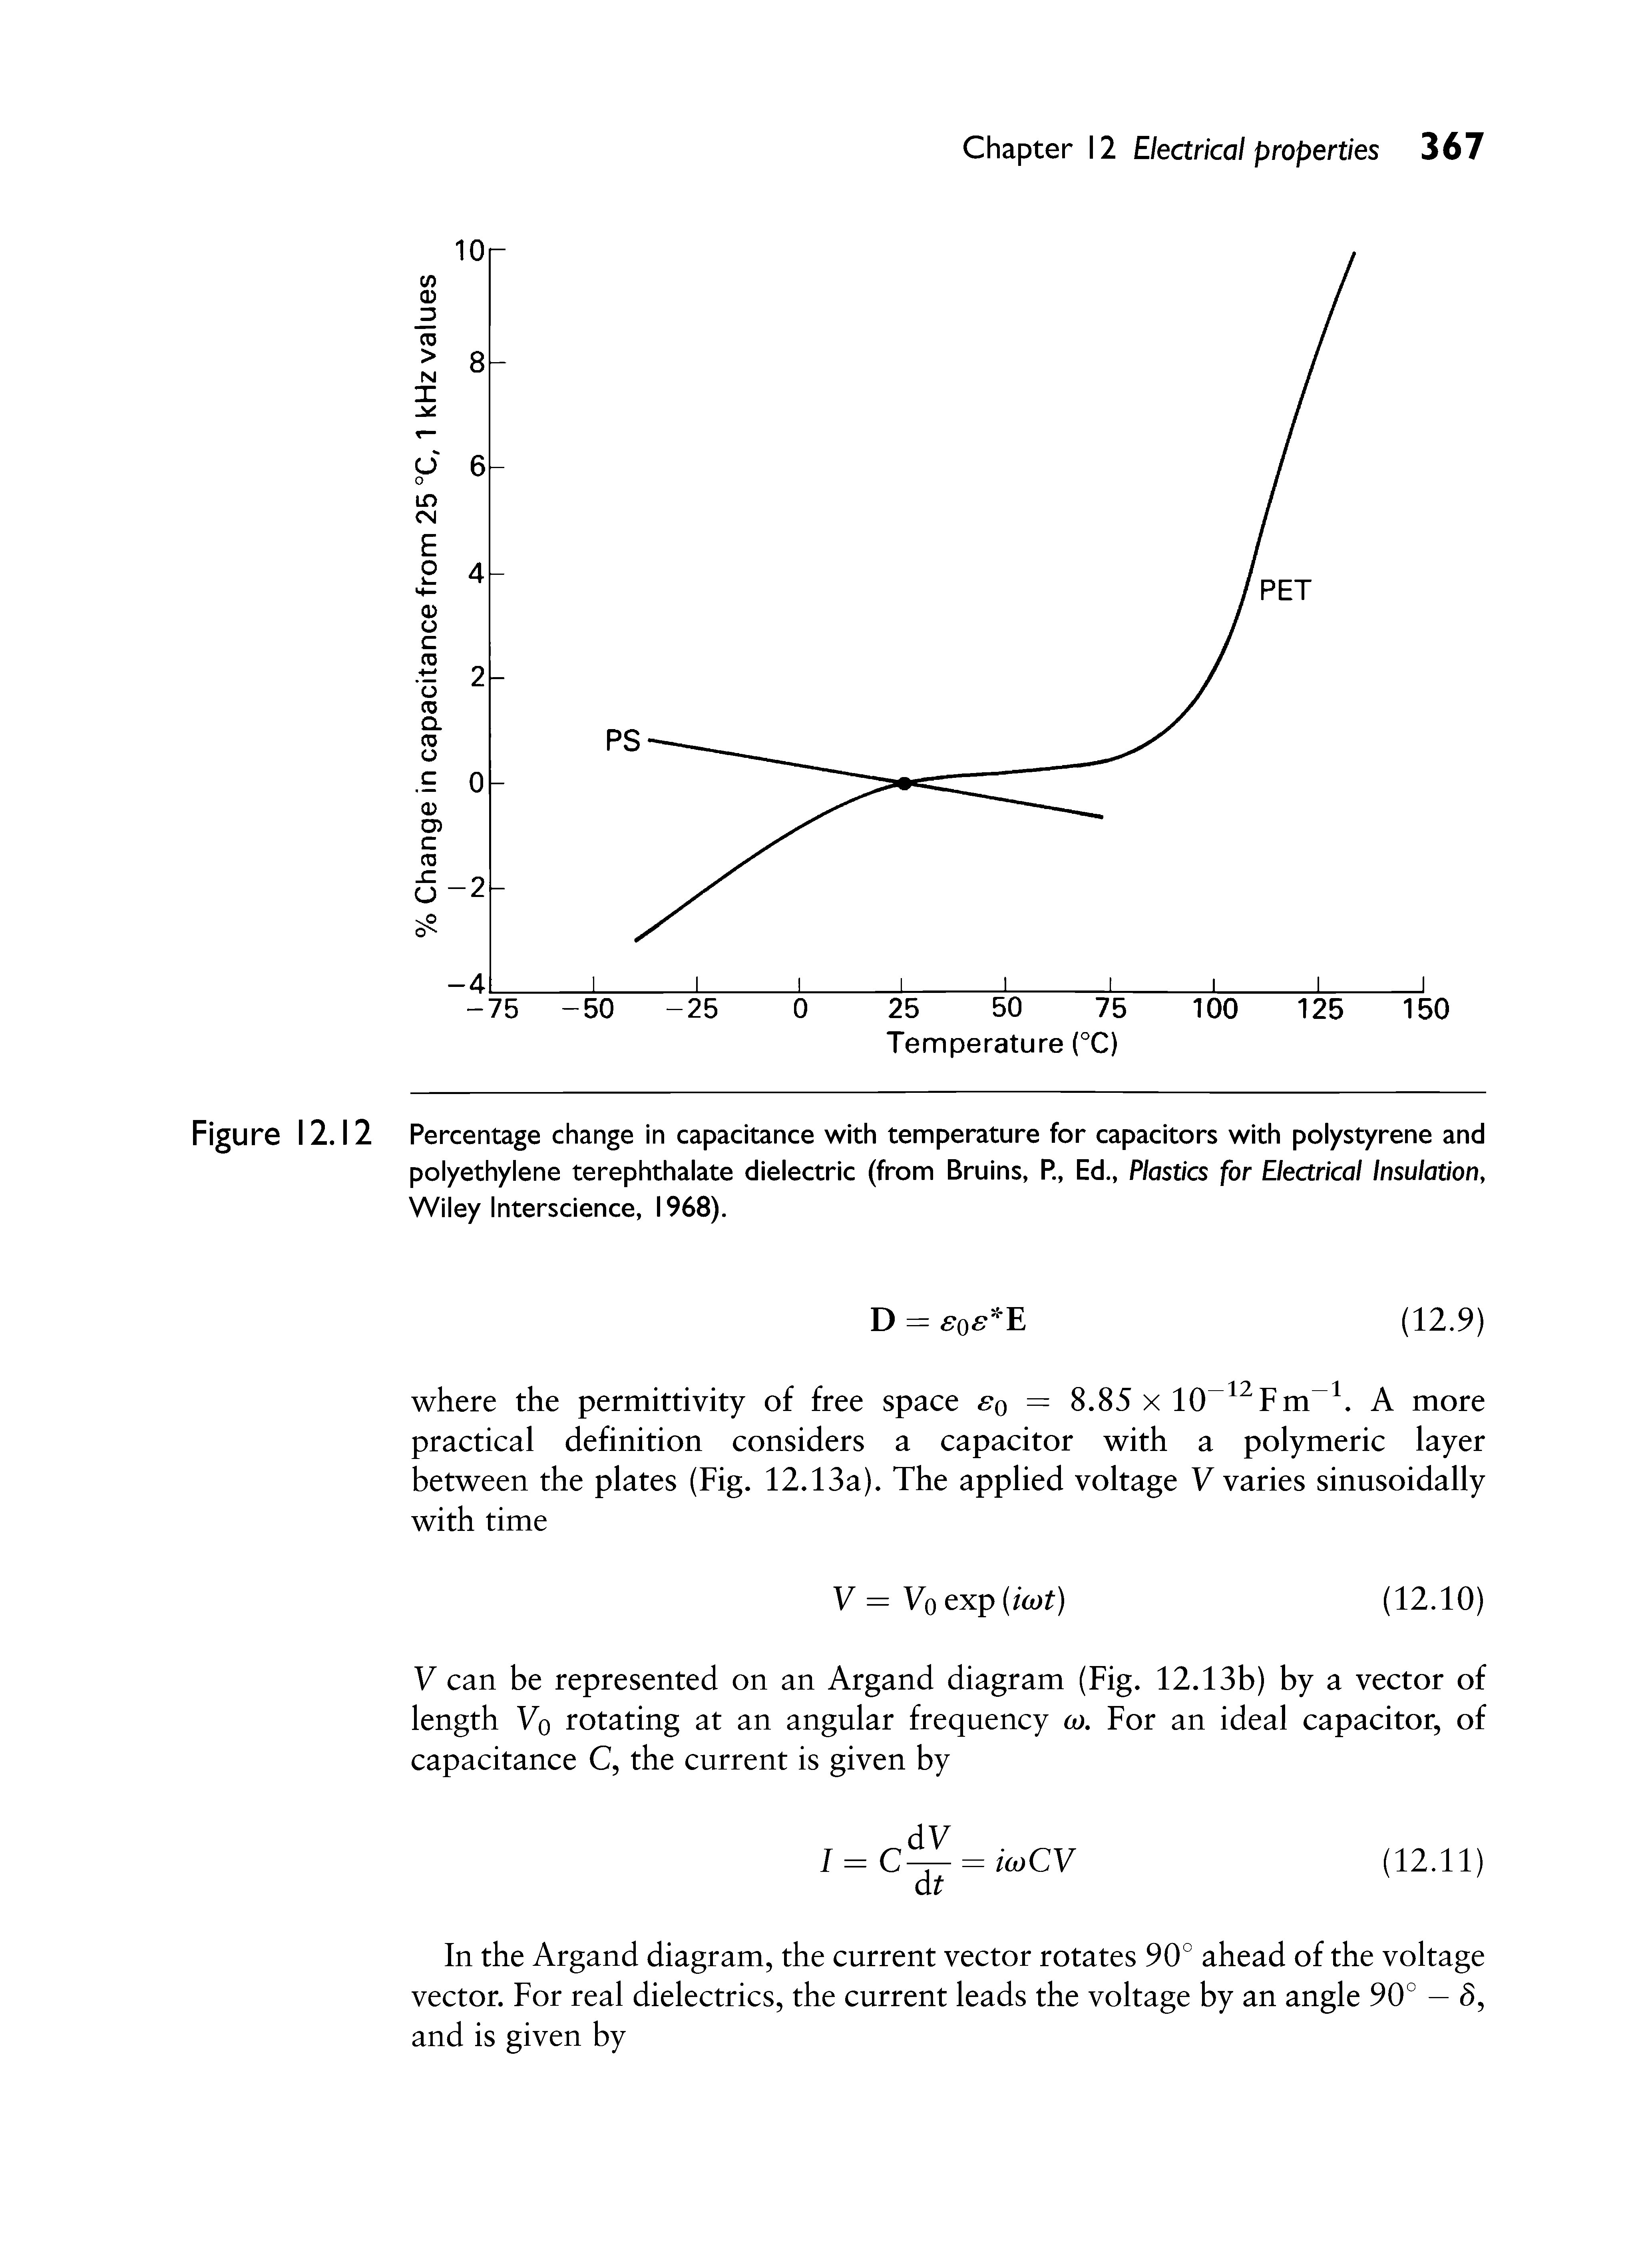 Figure 12.12 Percentage change in capacitance with temperature for capacitors with polystyrene and polyethylene terephthalate dielectric (from Bruins, R, Ed., Plastics for Electrical Insulation, Wiley Interscience, 1968).